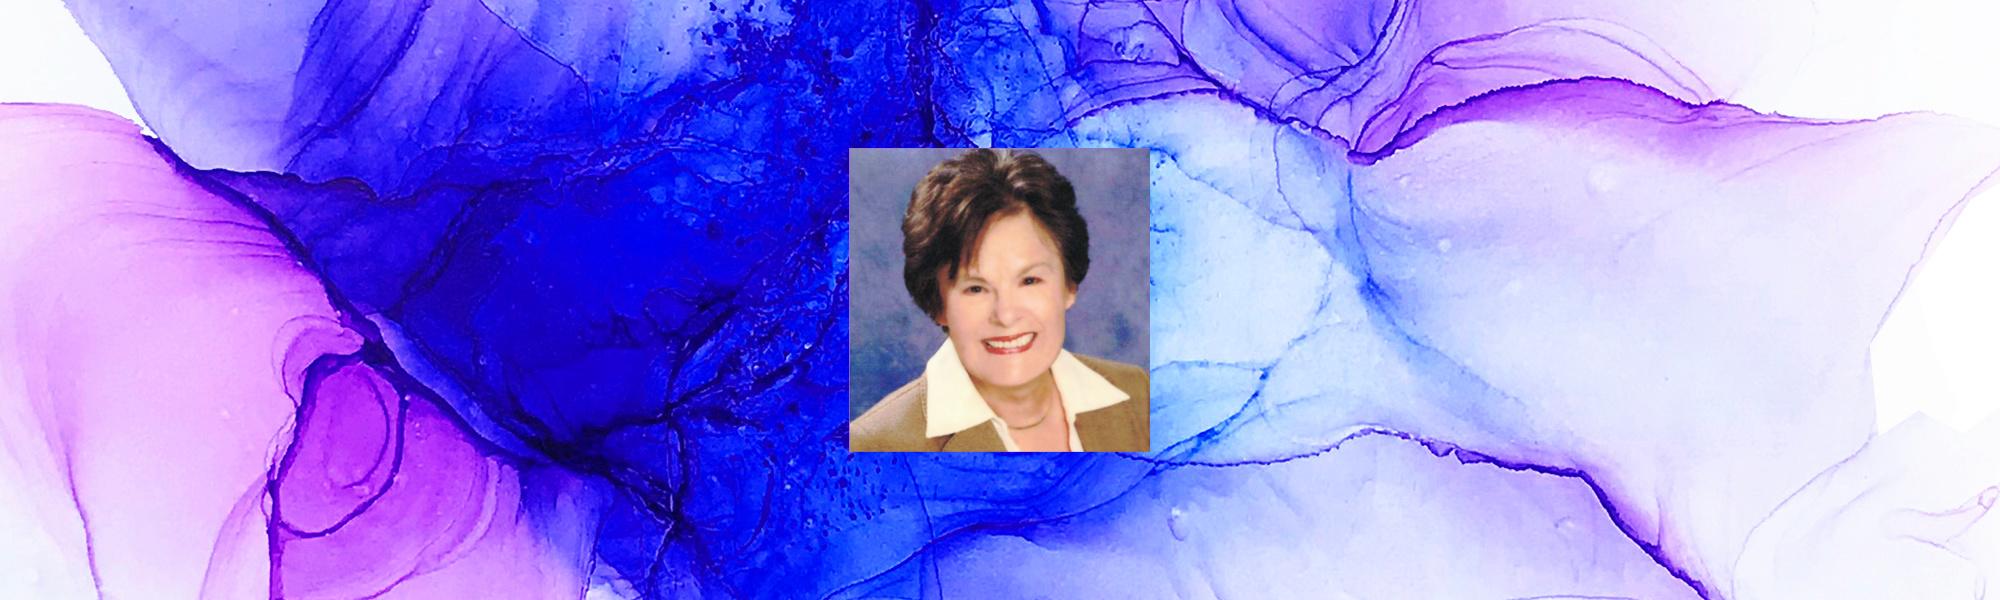 image shows a headshot of Rev. Marilyn Roth over an abstract painting.